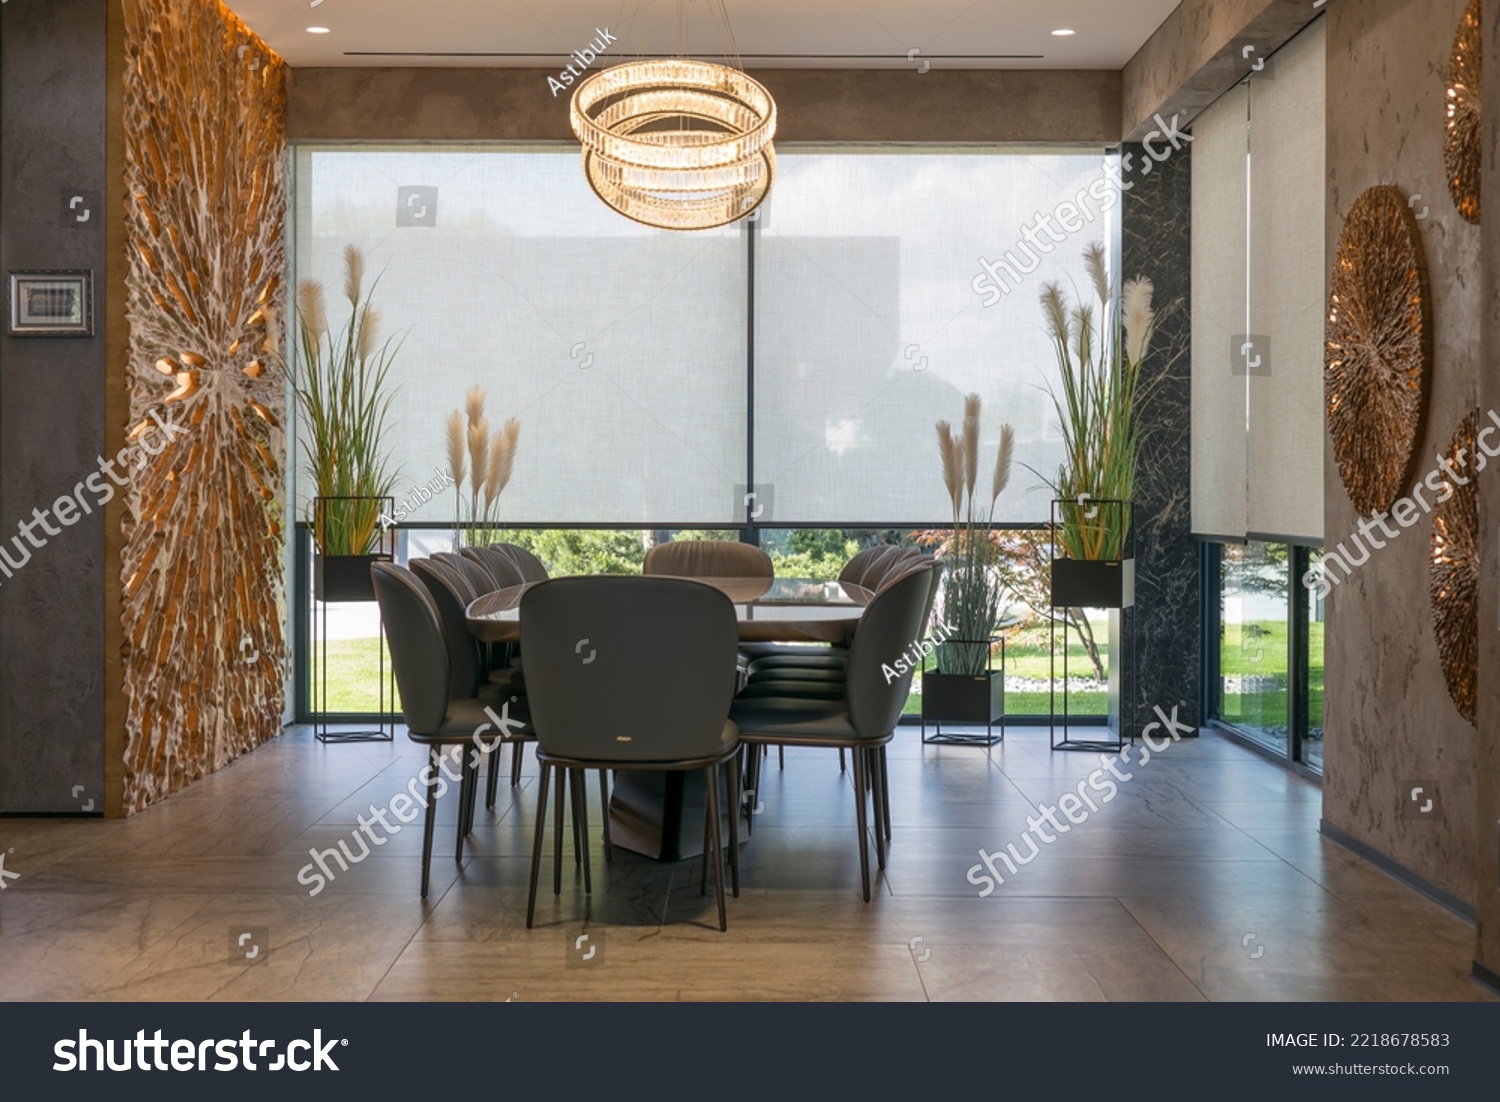 Roller blinds in the interior. Automatic solar shades large size on the windows. Modern interior with wood decor panels on walls. Plants in hi-tech flower pots. Electric sunscreen curtains for home.  #2218678583